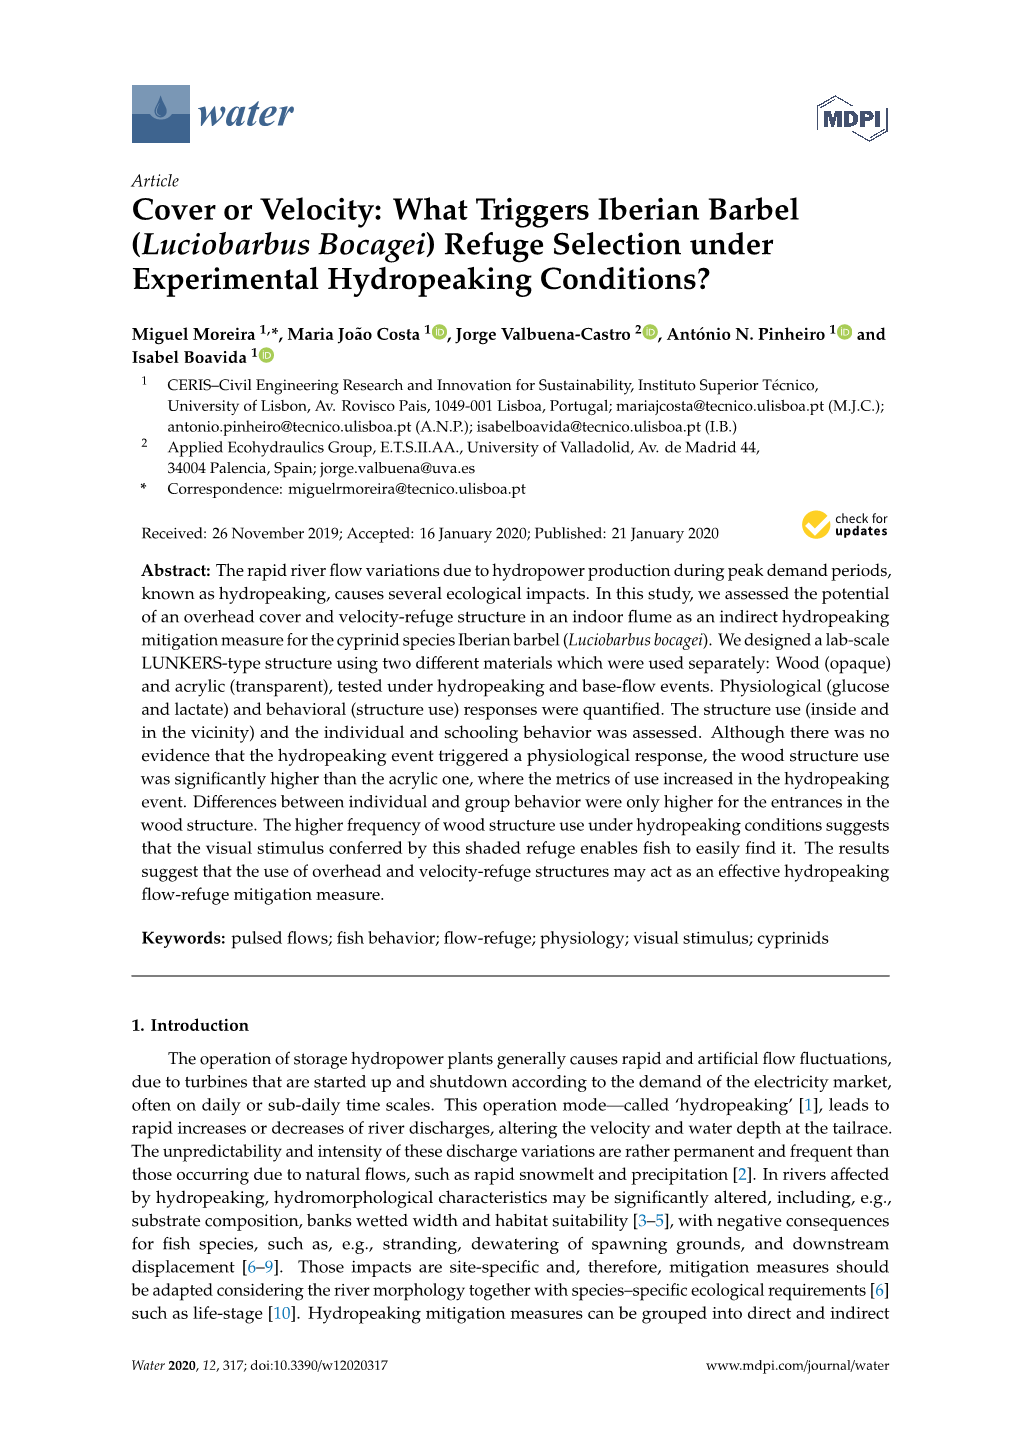 Cover Or Velocity: What Triggers Iberian Barbel (Luciobarbus Bocagei) Refuge Selection Under Experimental Hydropeaking Conditions?